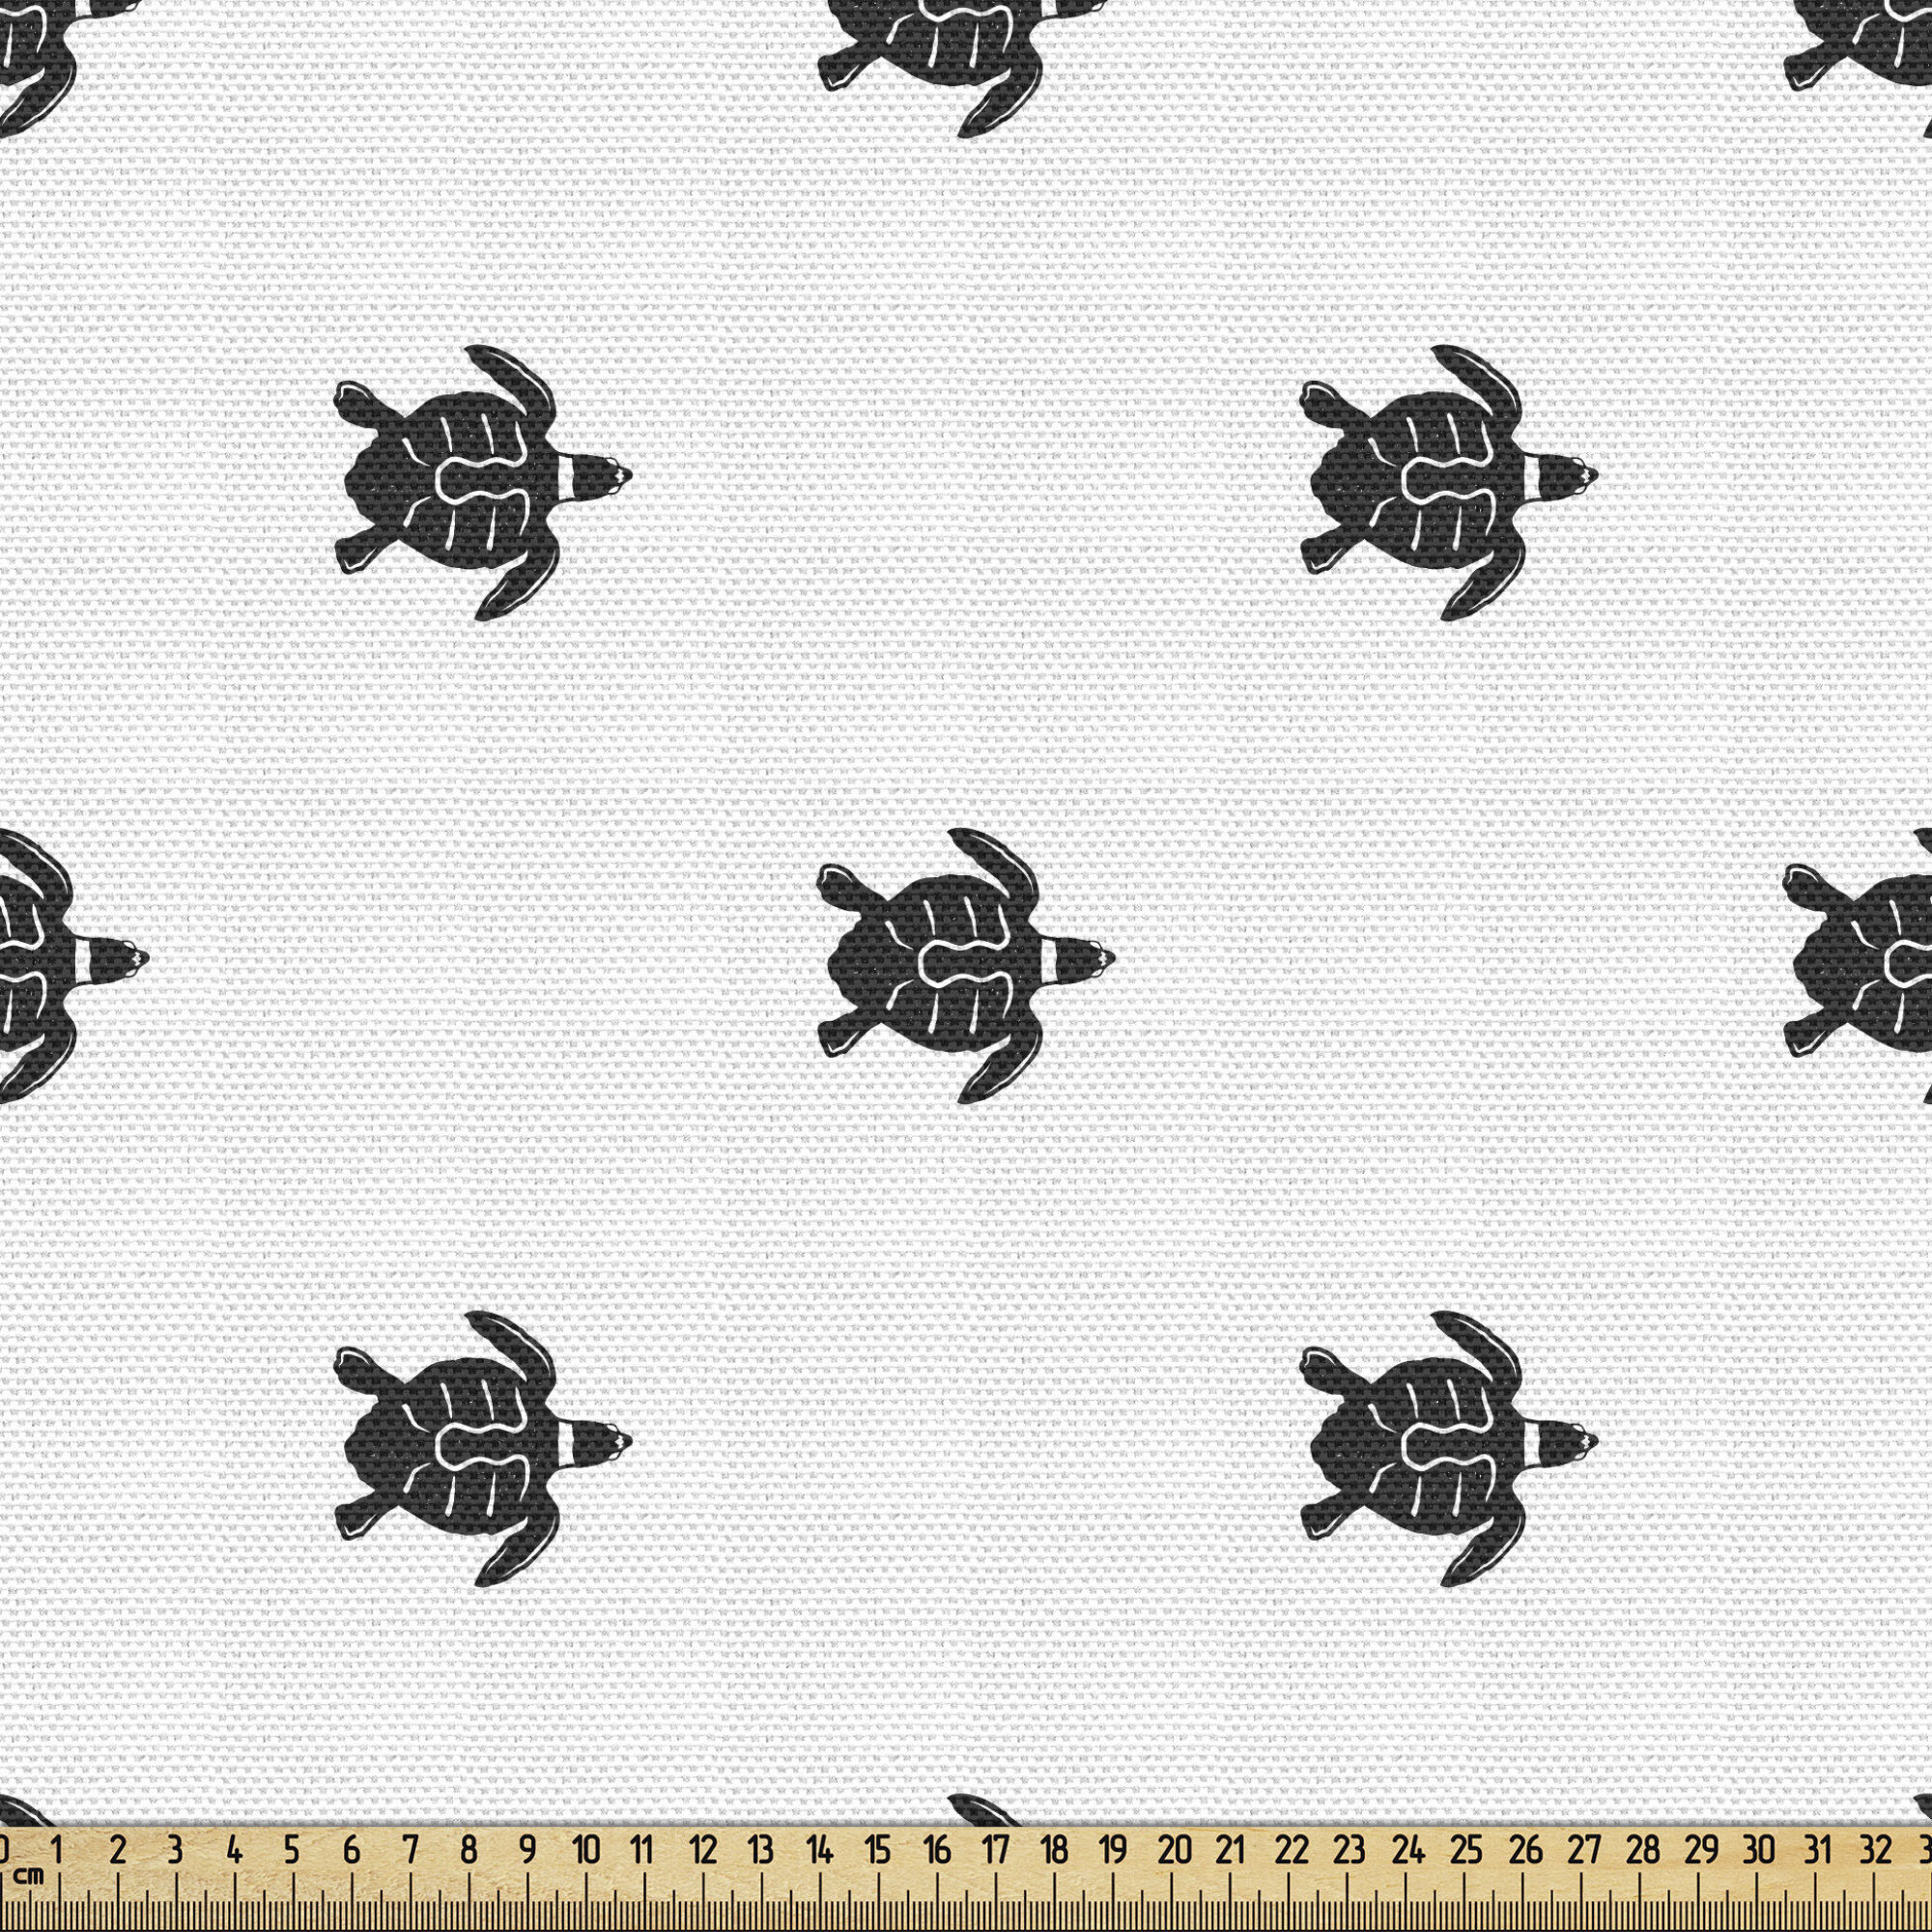 East Urban Home fab_167504_Ambesonne Turtle Fabric By The Yard, Repeated  Motifs Of Crawling Sea Animals Oceanic Exotic Layout Print, Decorative  Fabric For Upholstery And Home Accents, Charcoal Grey And White | Wayfair